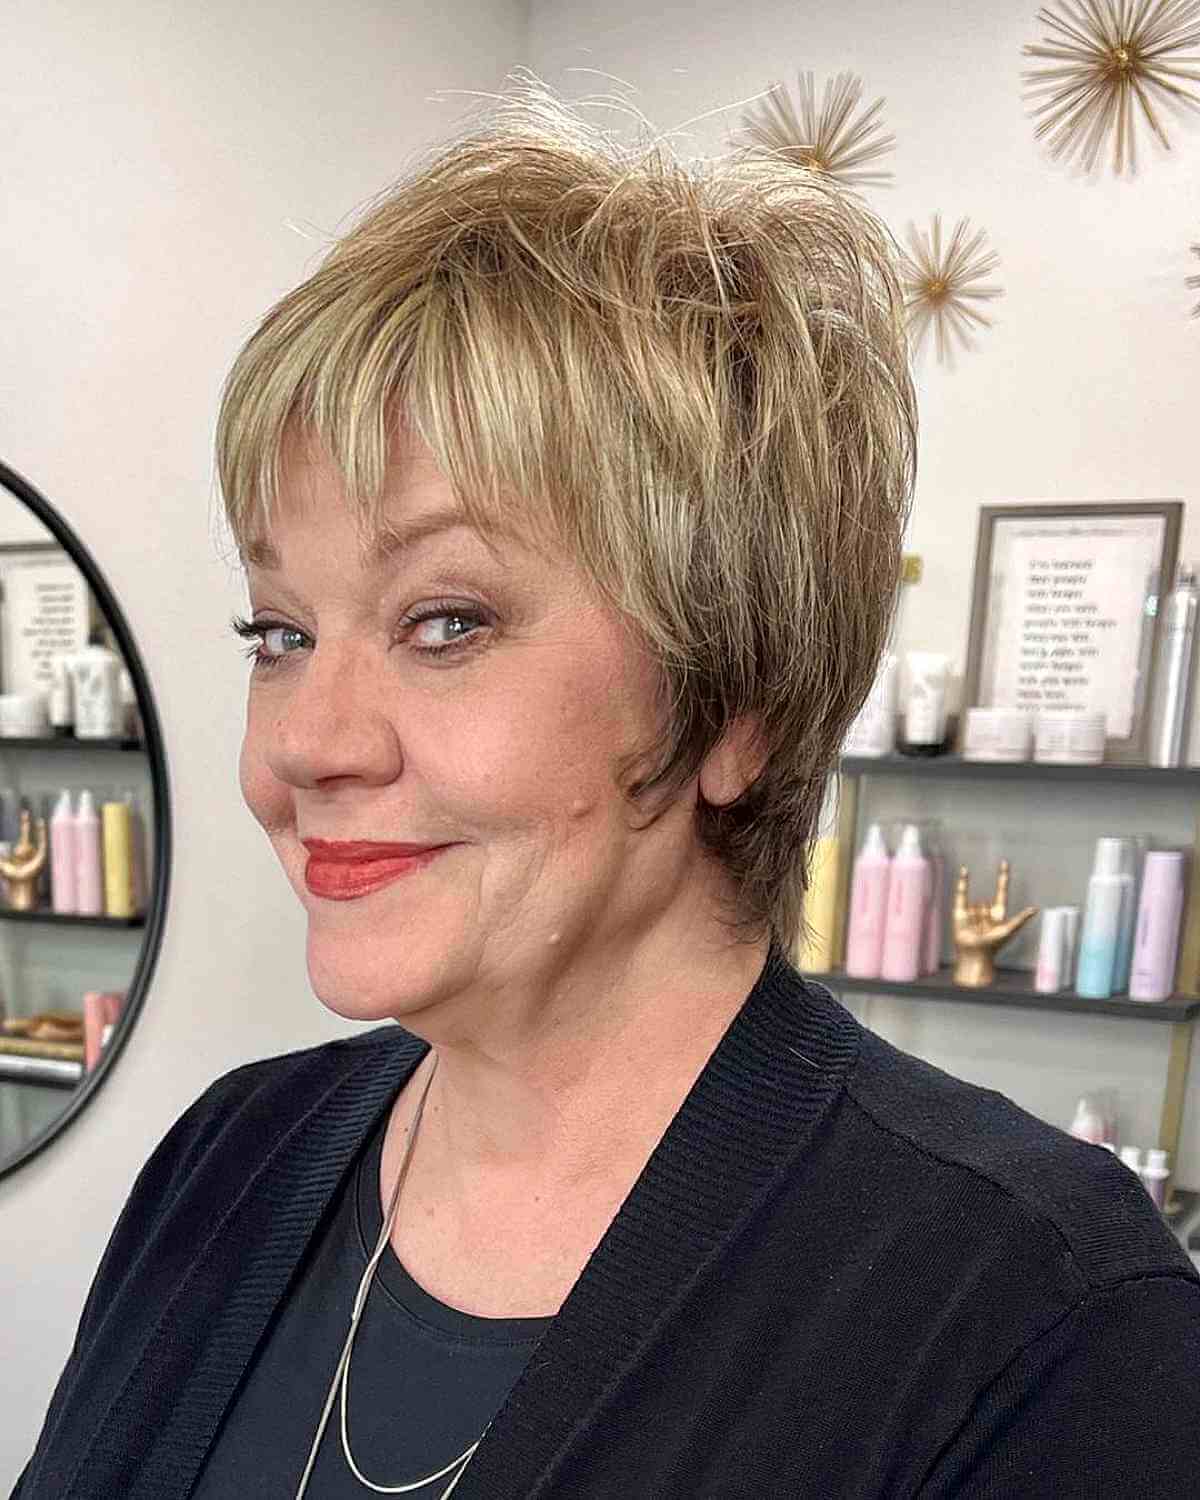 Shaggy Long Pixie Cut on Fine Hair for Ladies 70 and Up